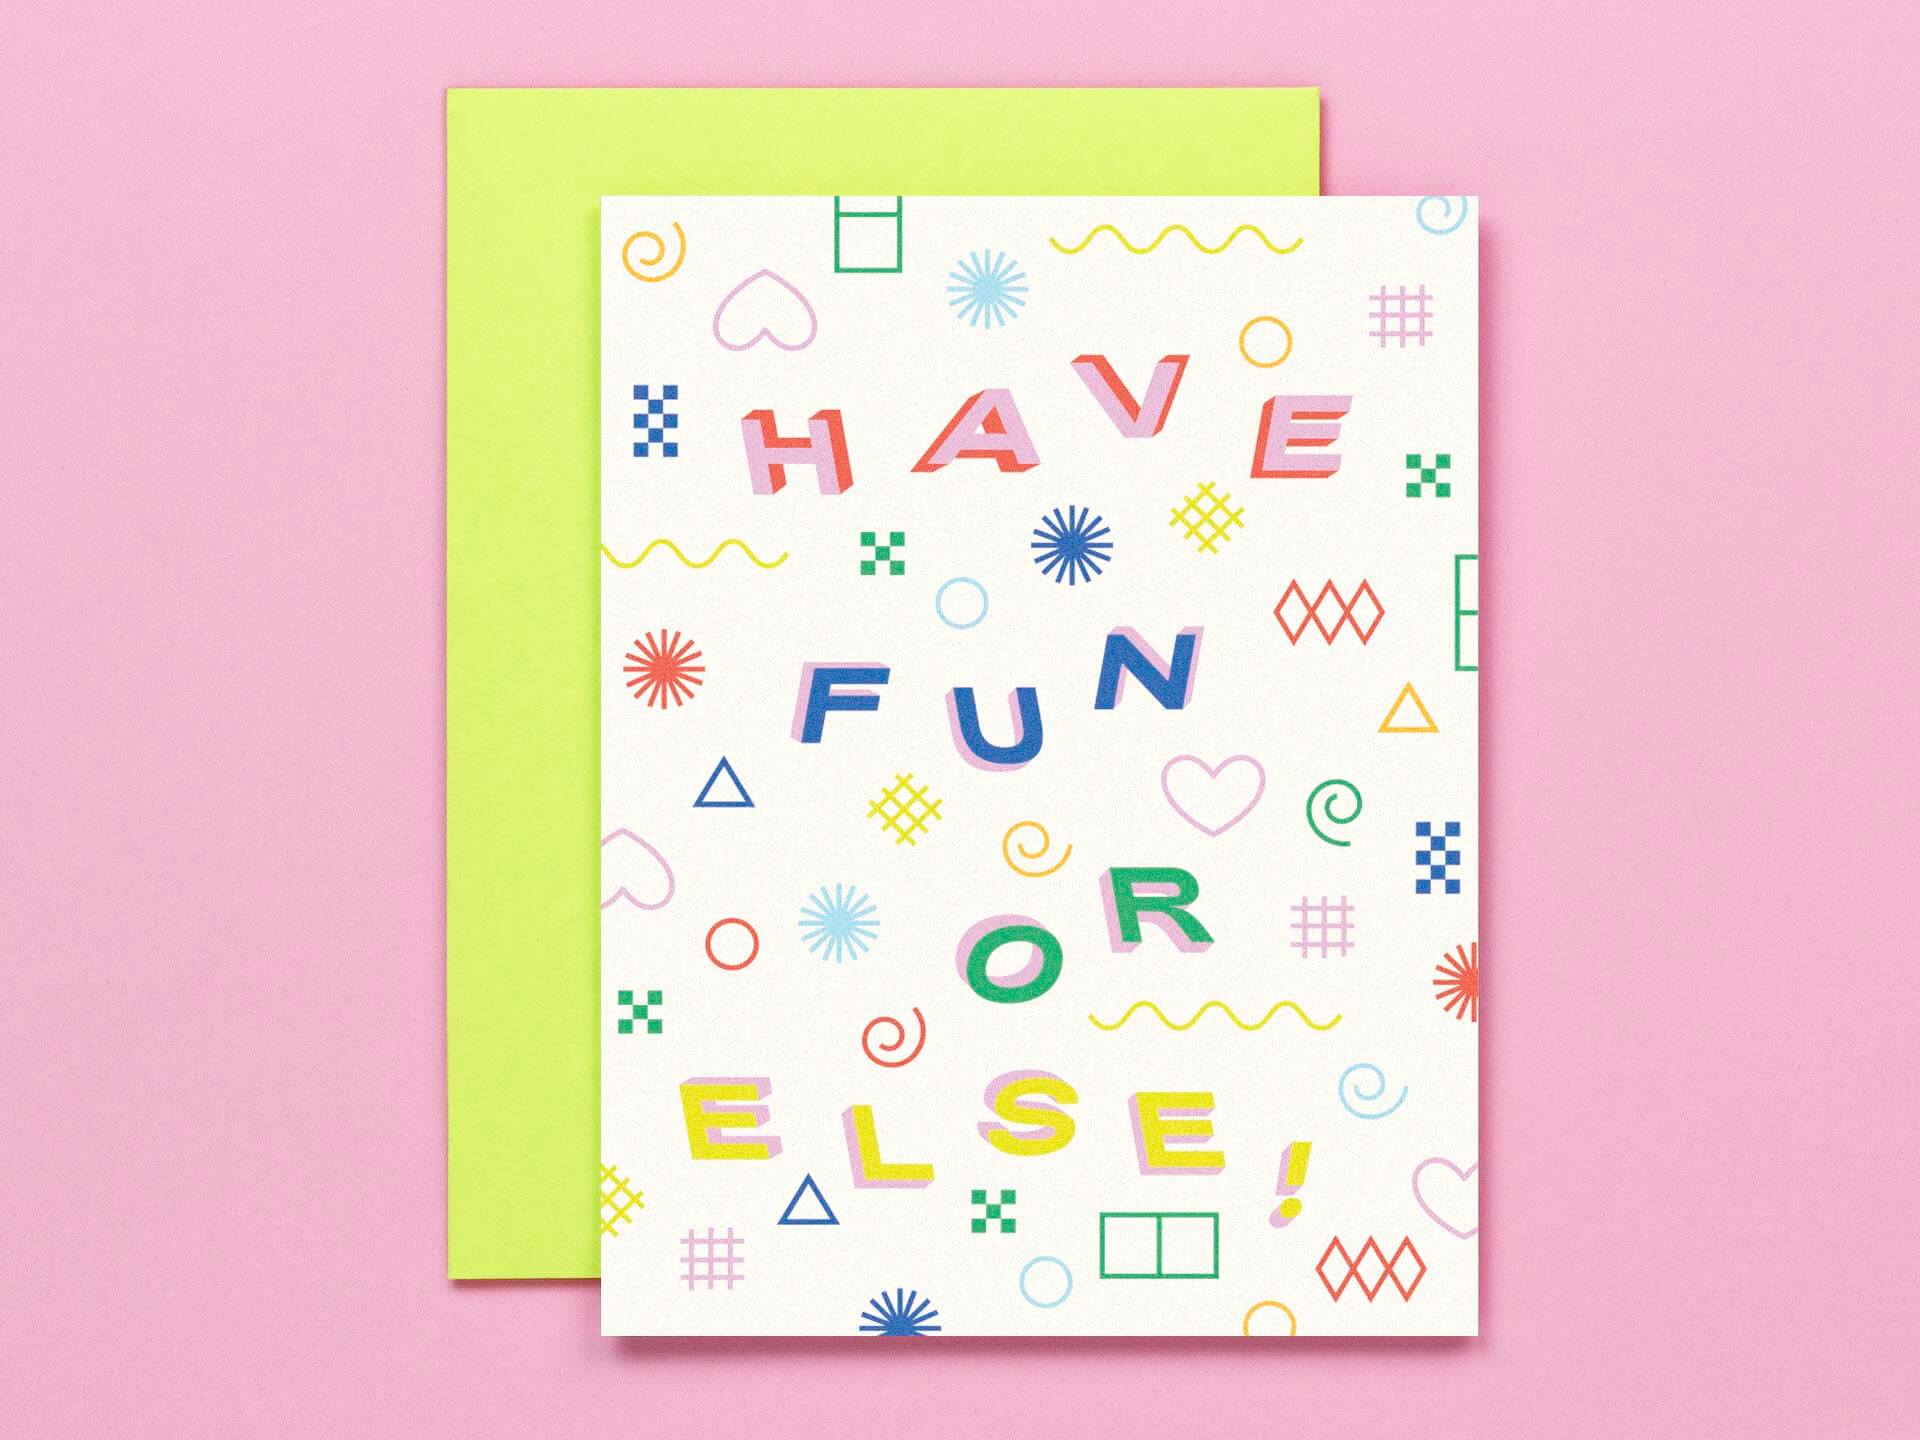 "Have fun or else" funny birthday card with a pattern of colorful abstract and geometric shapes. Made in USA by My Darlin' @mydarlin_bk